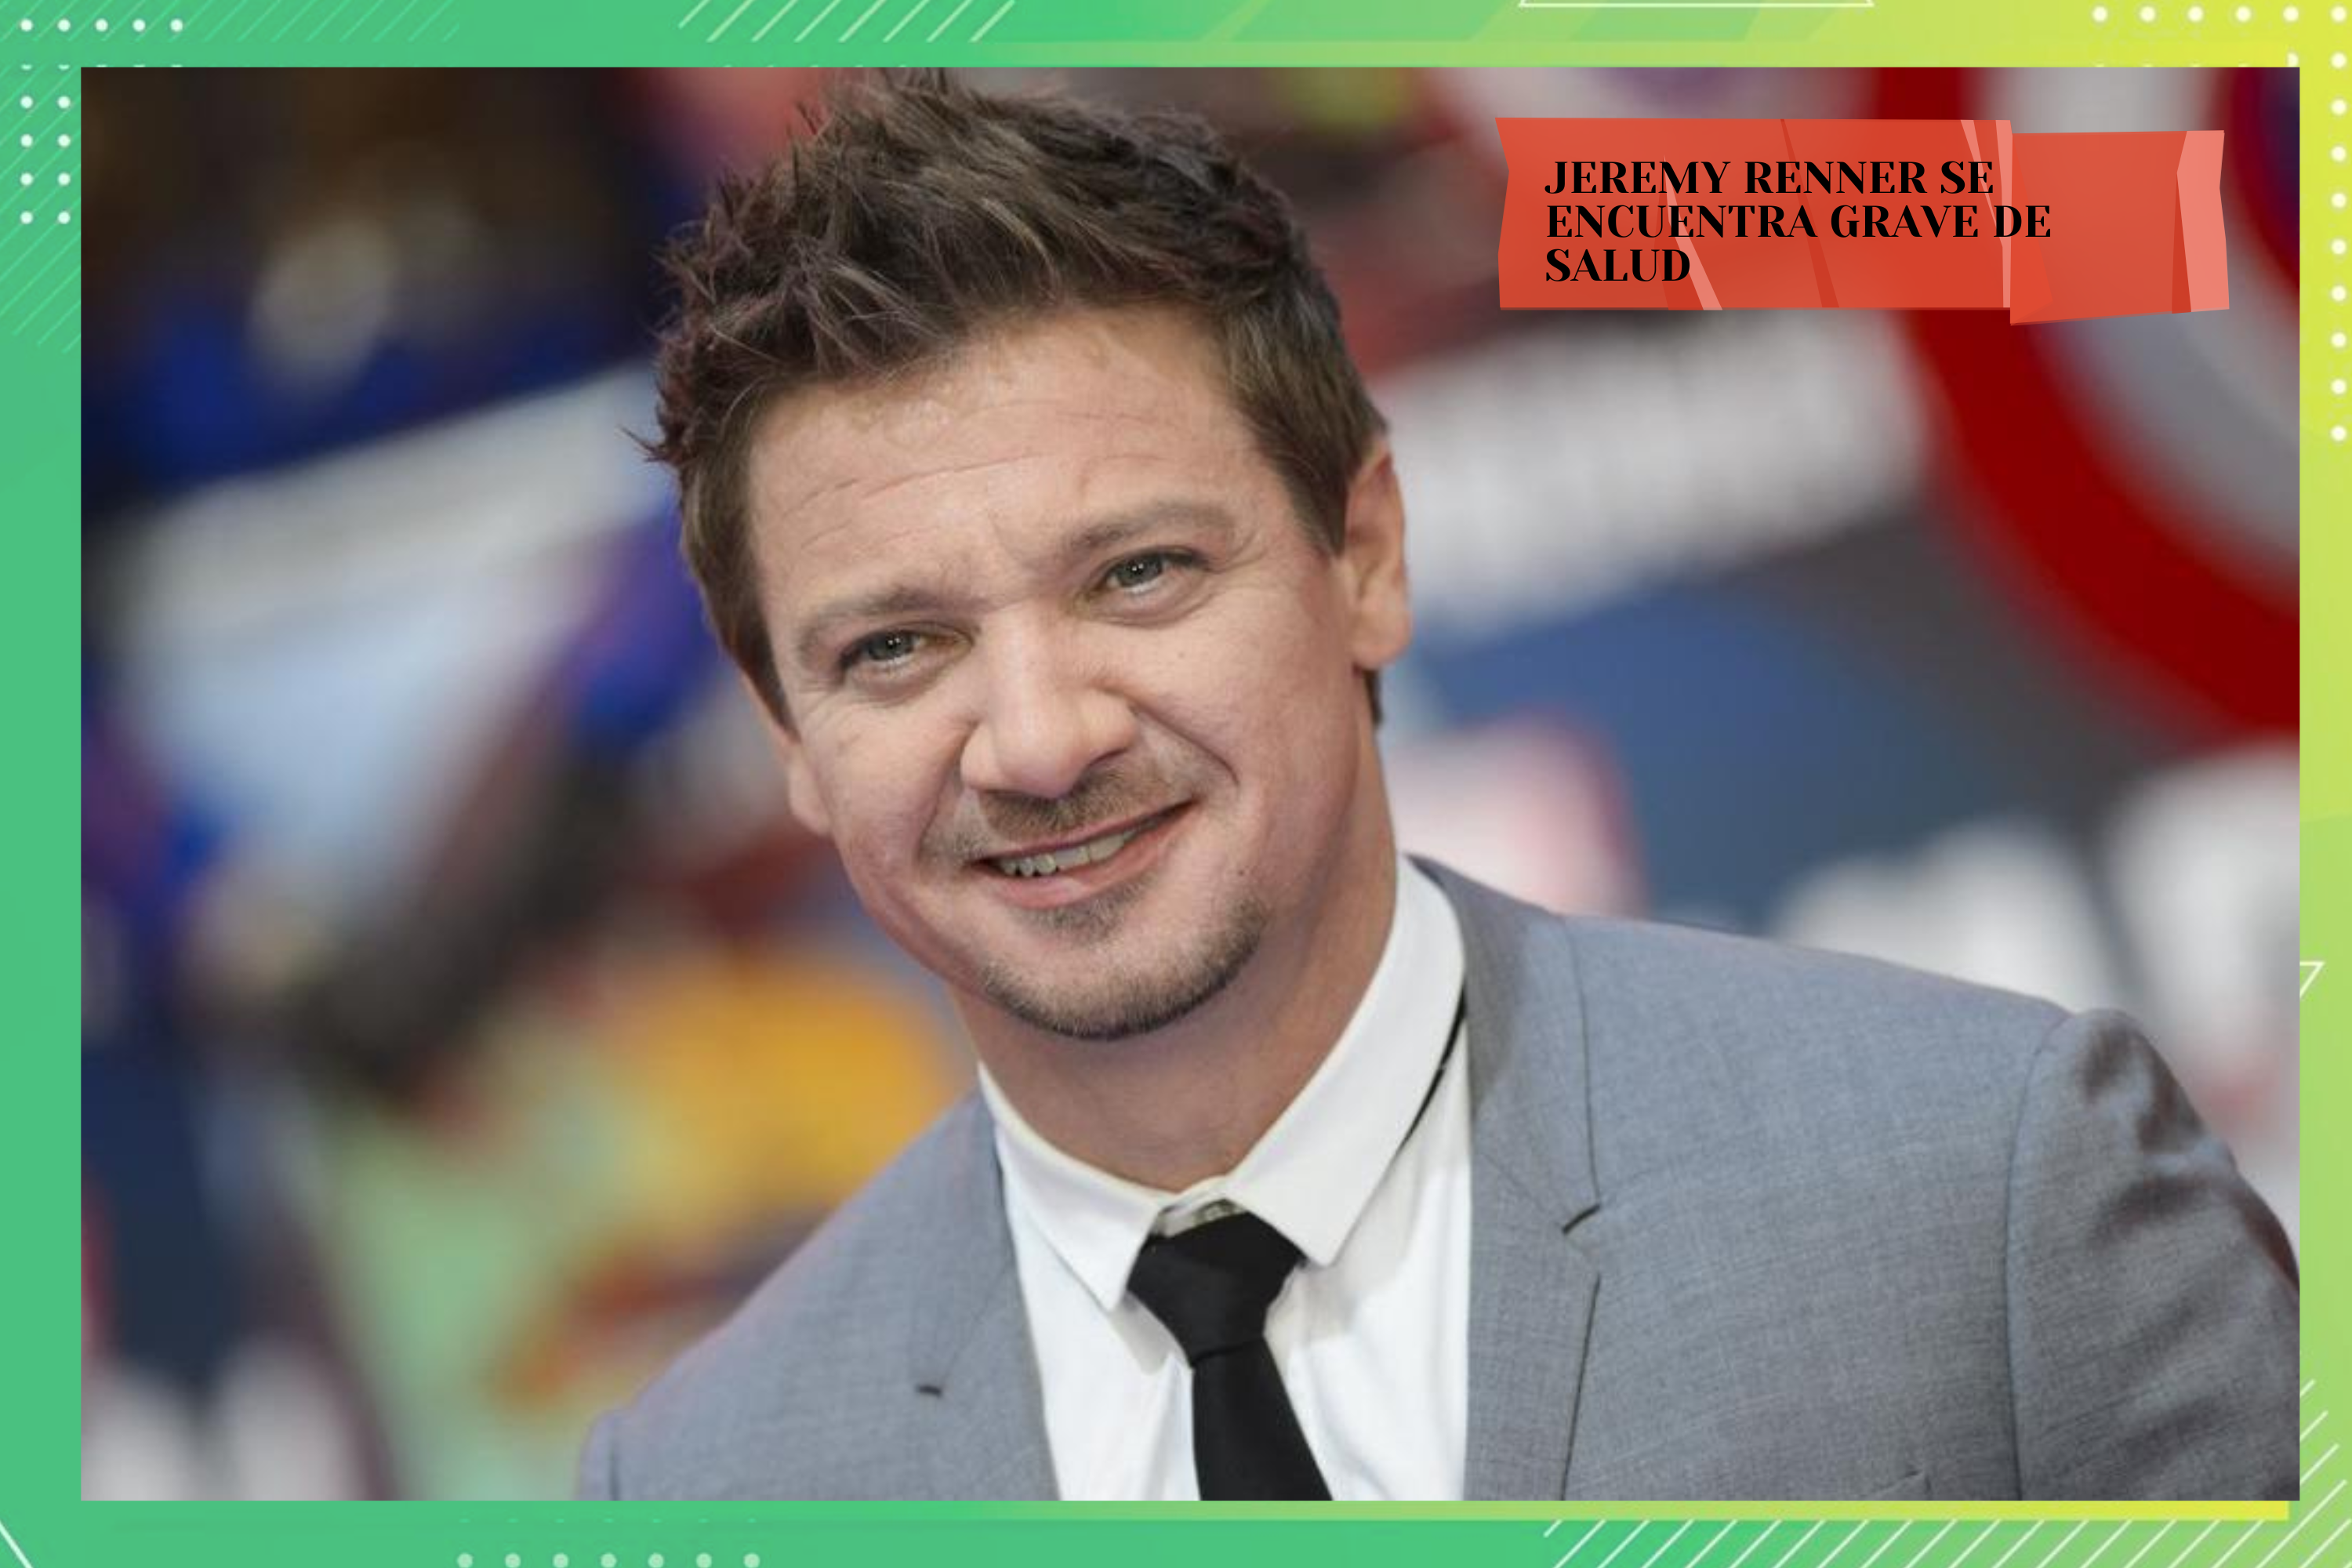 Jeremy Renner sufre aparatoso accidente.